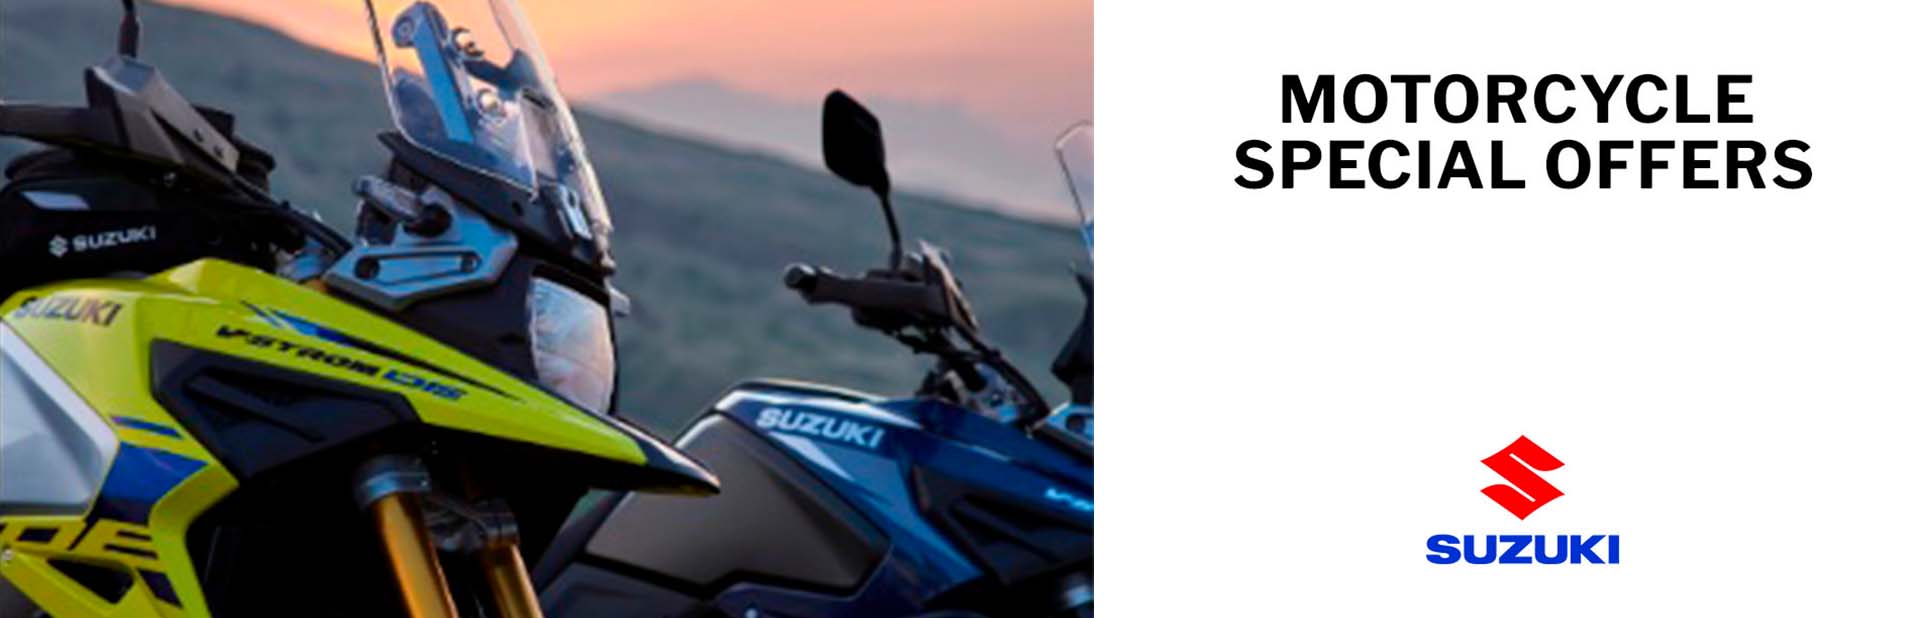 MOTORCYCLE SPECIAL OFFERS